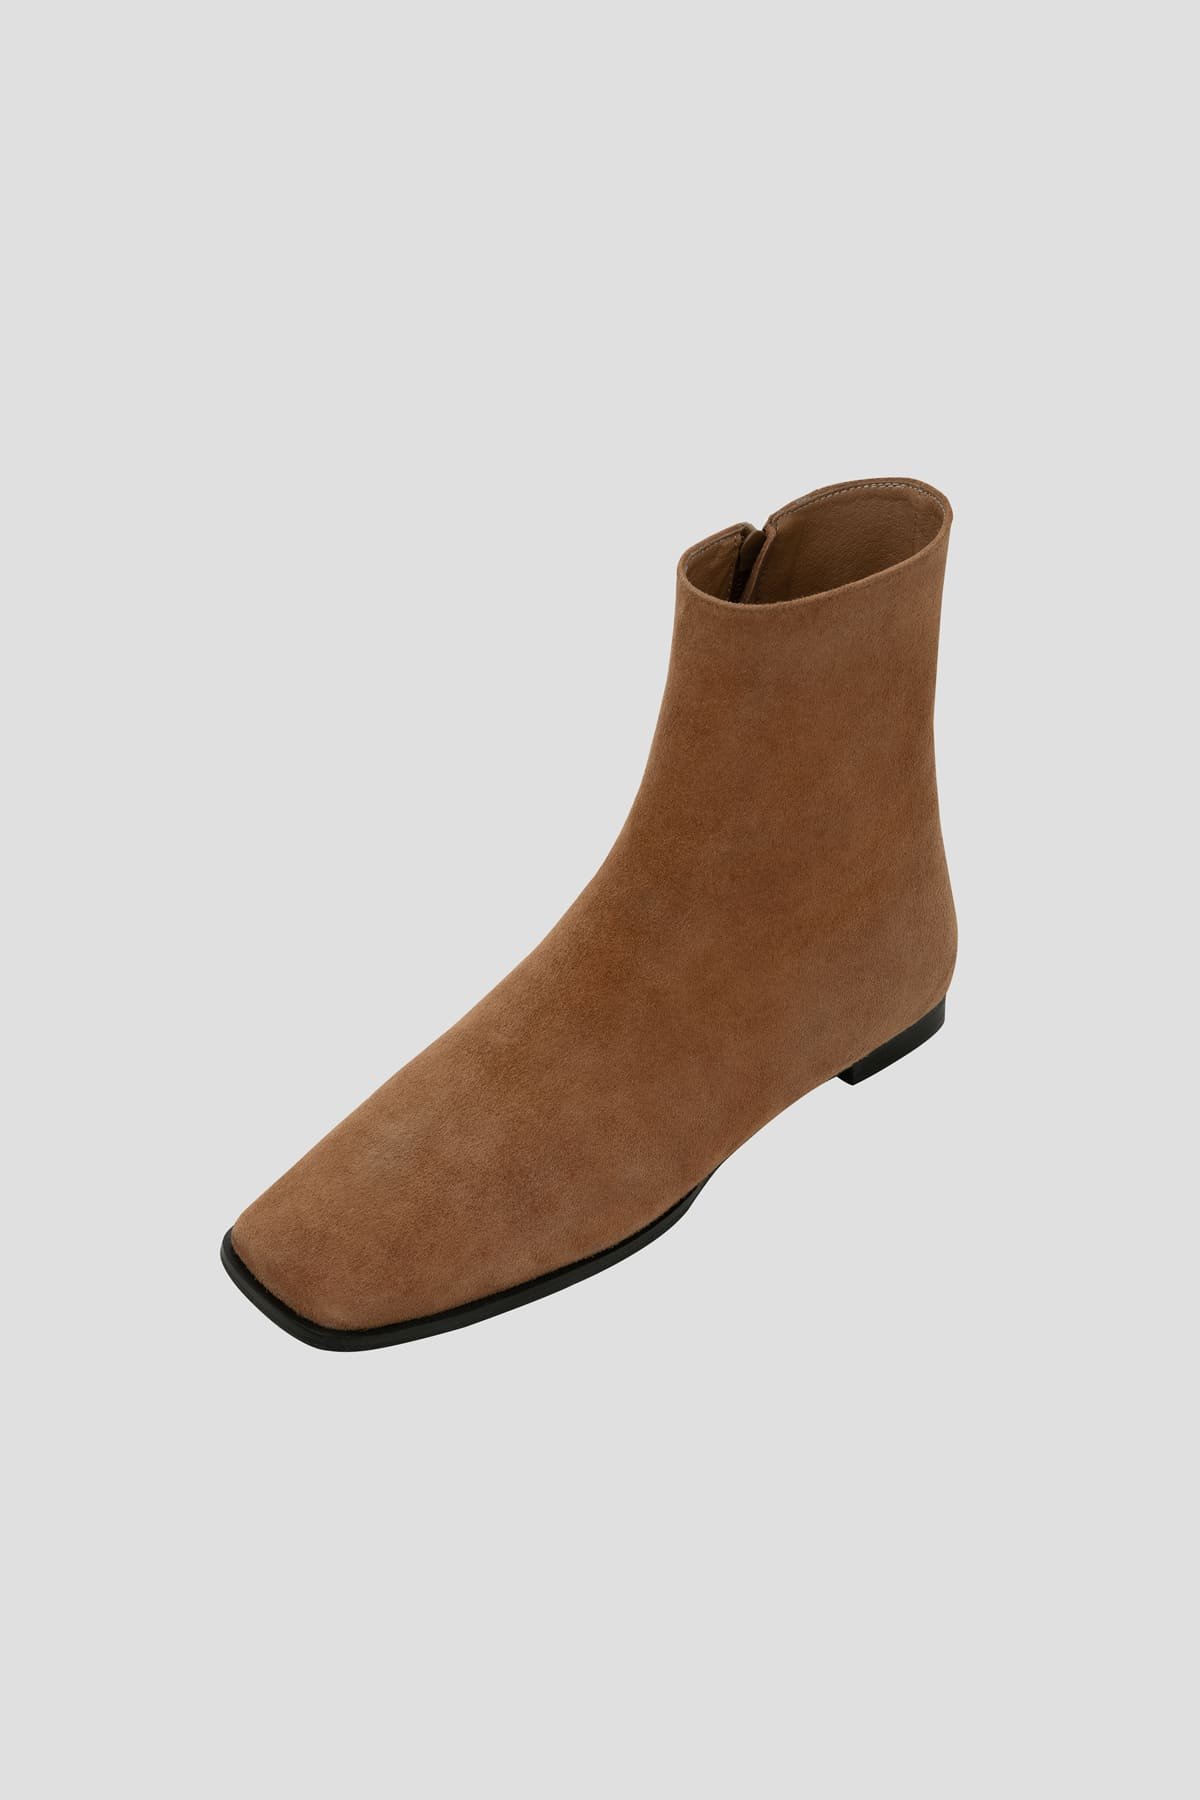 Toast Boots (Suede)